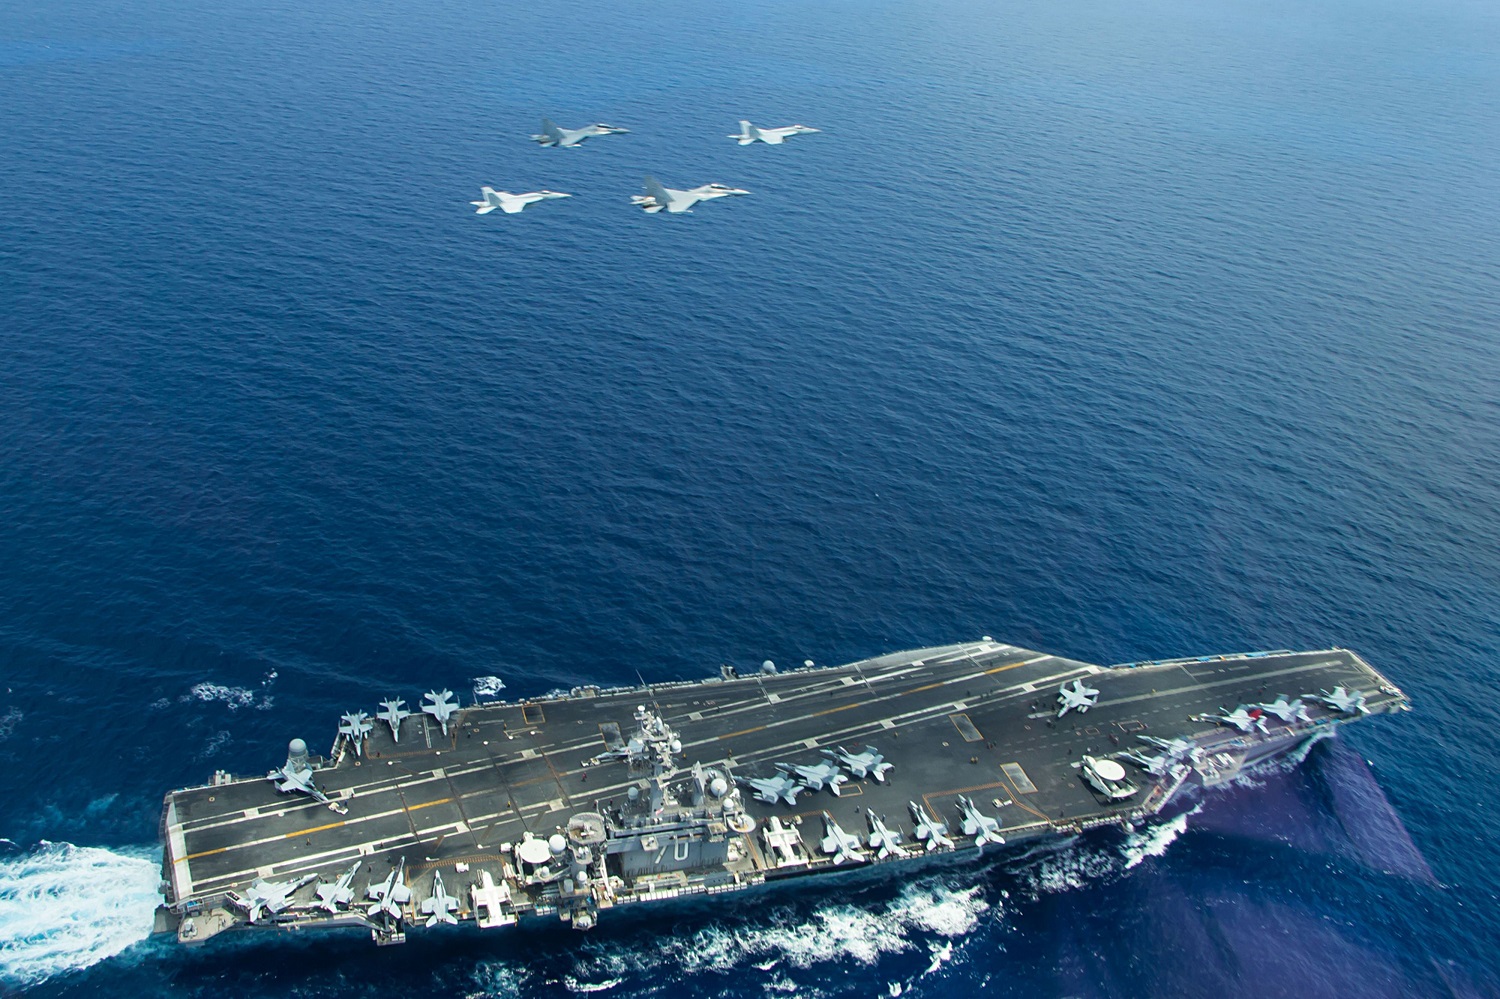 This May 10, 2015 US Navy handout photo shows two F/A-18 Super Hornets(L and R) and two Royal Malaysian Air Force SU-30MKM/Flanker H, flying above the aircraft carrier USS Carl Vinson (CVN 70) operating in the South China Sea during a bi-lateral exercise aimed at promoting interoperability with the Malaysian Royal Military. The Carl Vinson Strike Group is deployed to the U.S. 7th Fleet area of operations supporting security and stability in the Indo-Asia-Pacific region. AFP PHOTO / HANDOUT / US NAVY / LT. JONATHAN PFAFF == RESTRICTED TO EDITORIAL USE / MANDATORY CREDIT: "AFP PHOTO / HANDOUT / US NAVY / LT. JONATHAN PFAFF "/ NO MARKETING / NO ADVERTISING CAMPAIGNS / NO A LA CARTE SALES / DISTRIBUTED AS A SERVICE TO CLIENTS ==